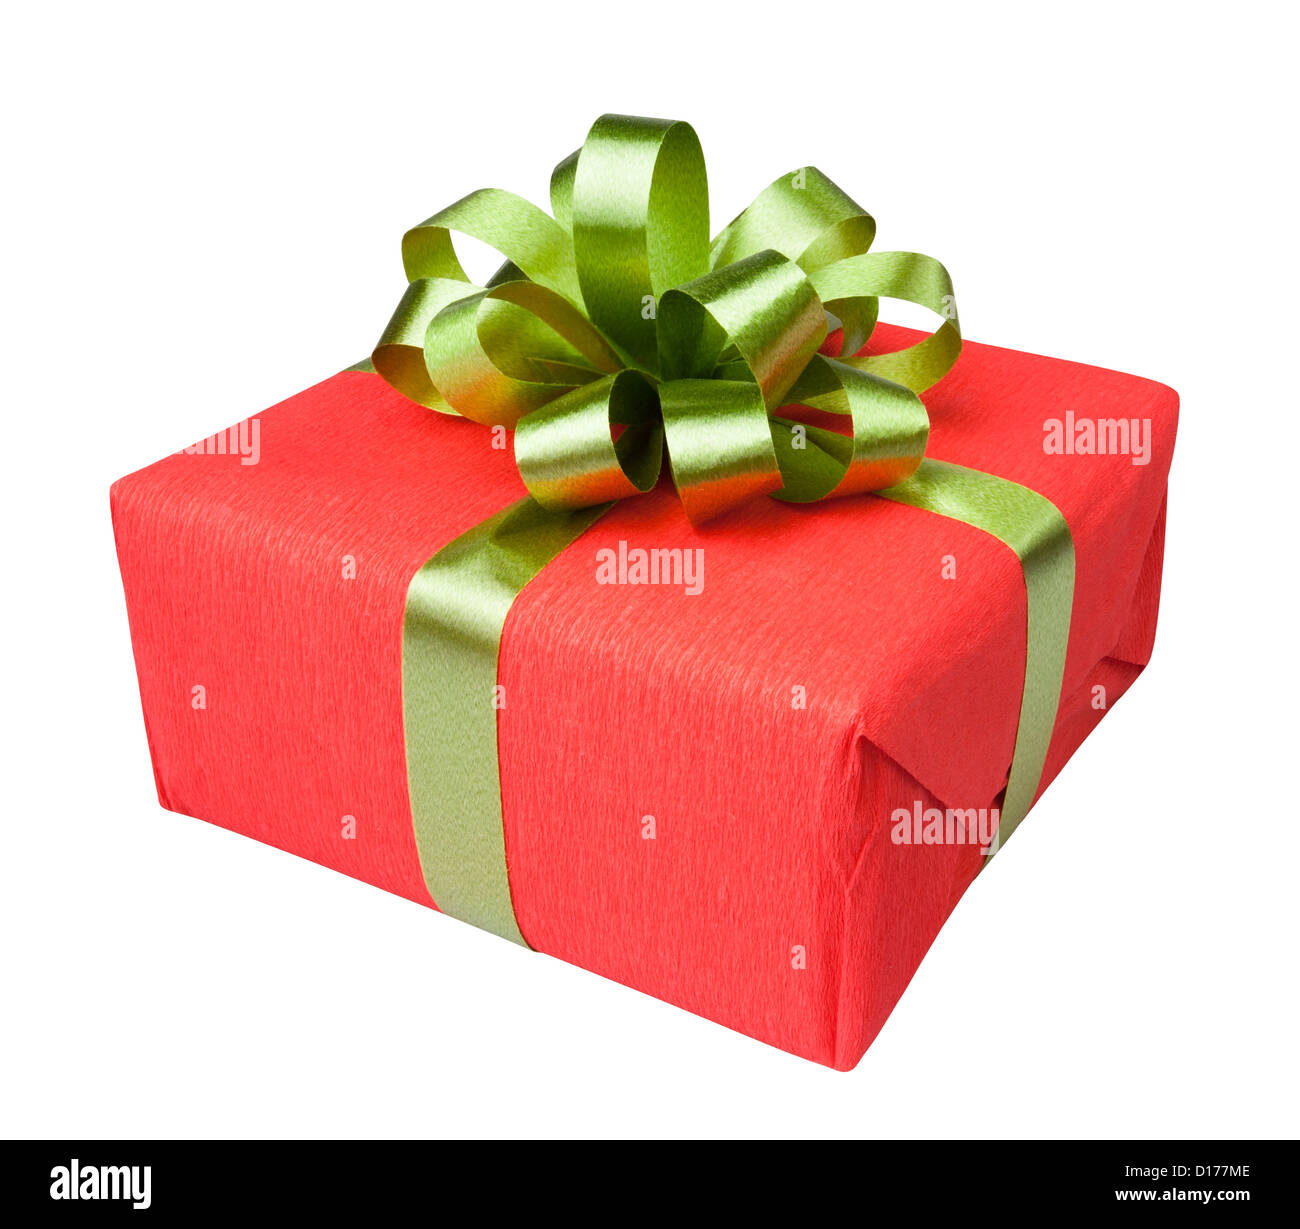 gift box present red on white background Stock Photo